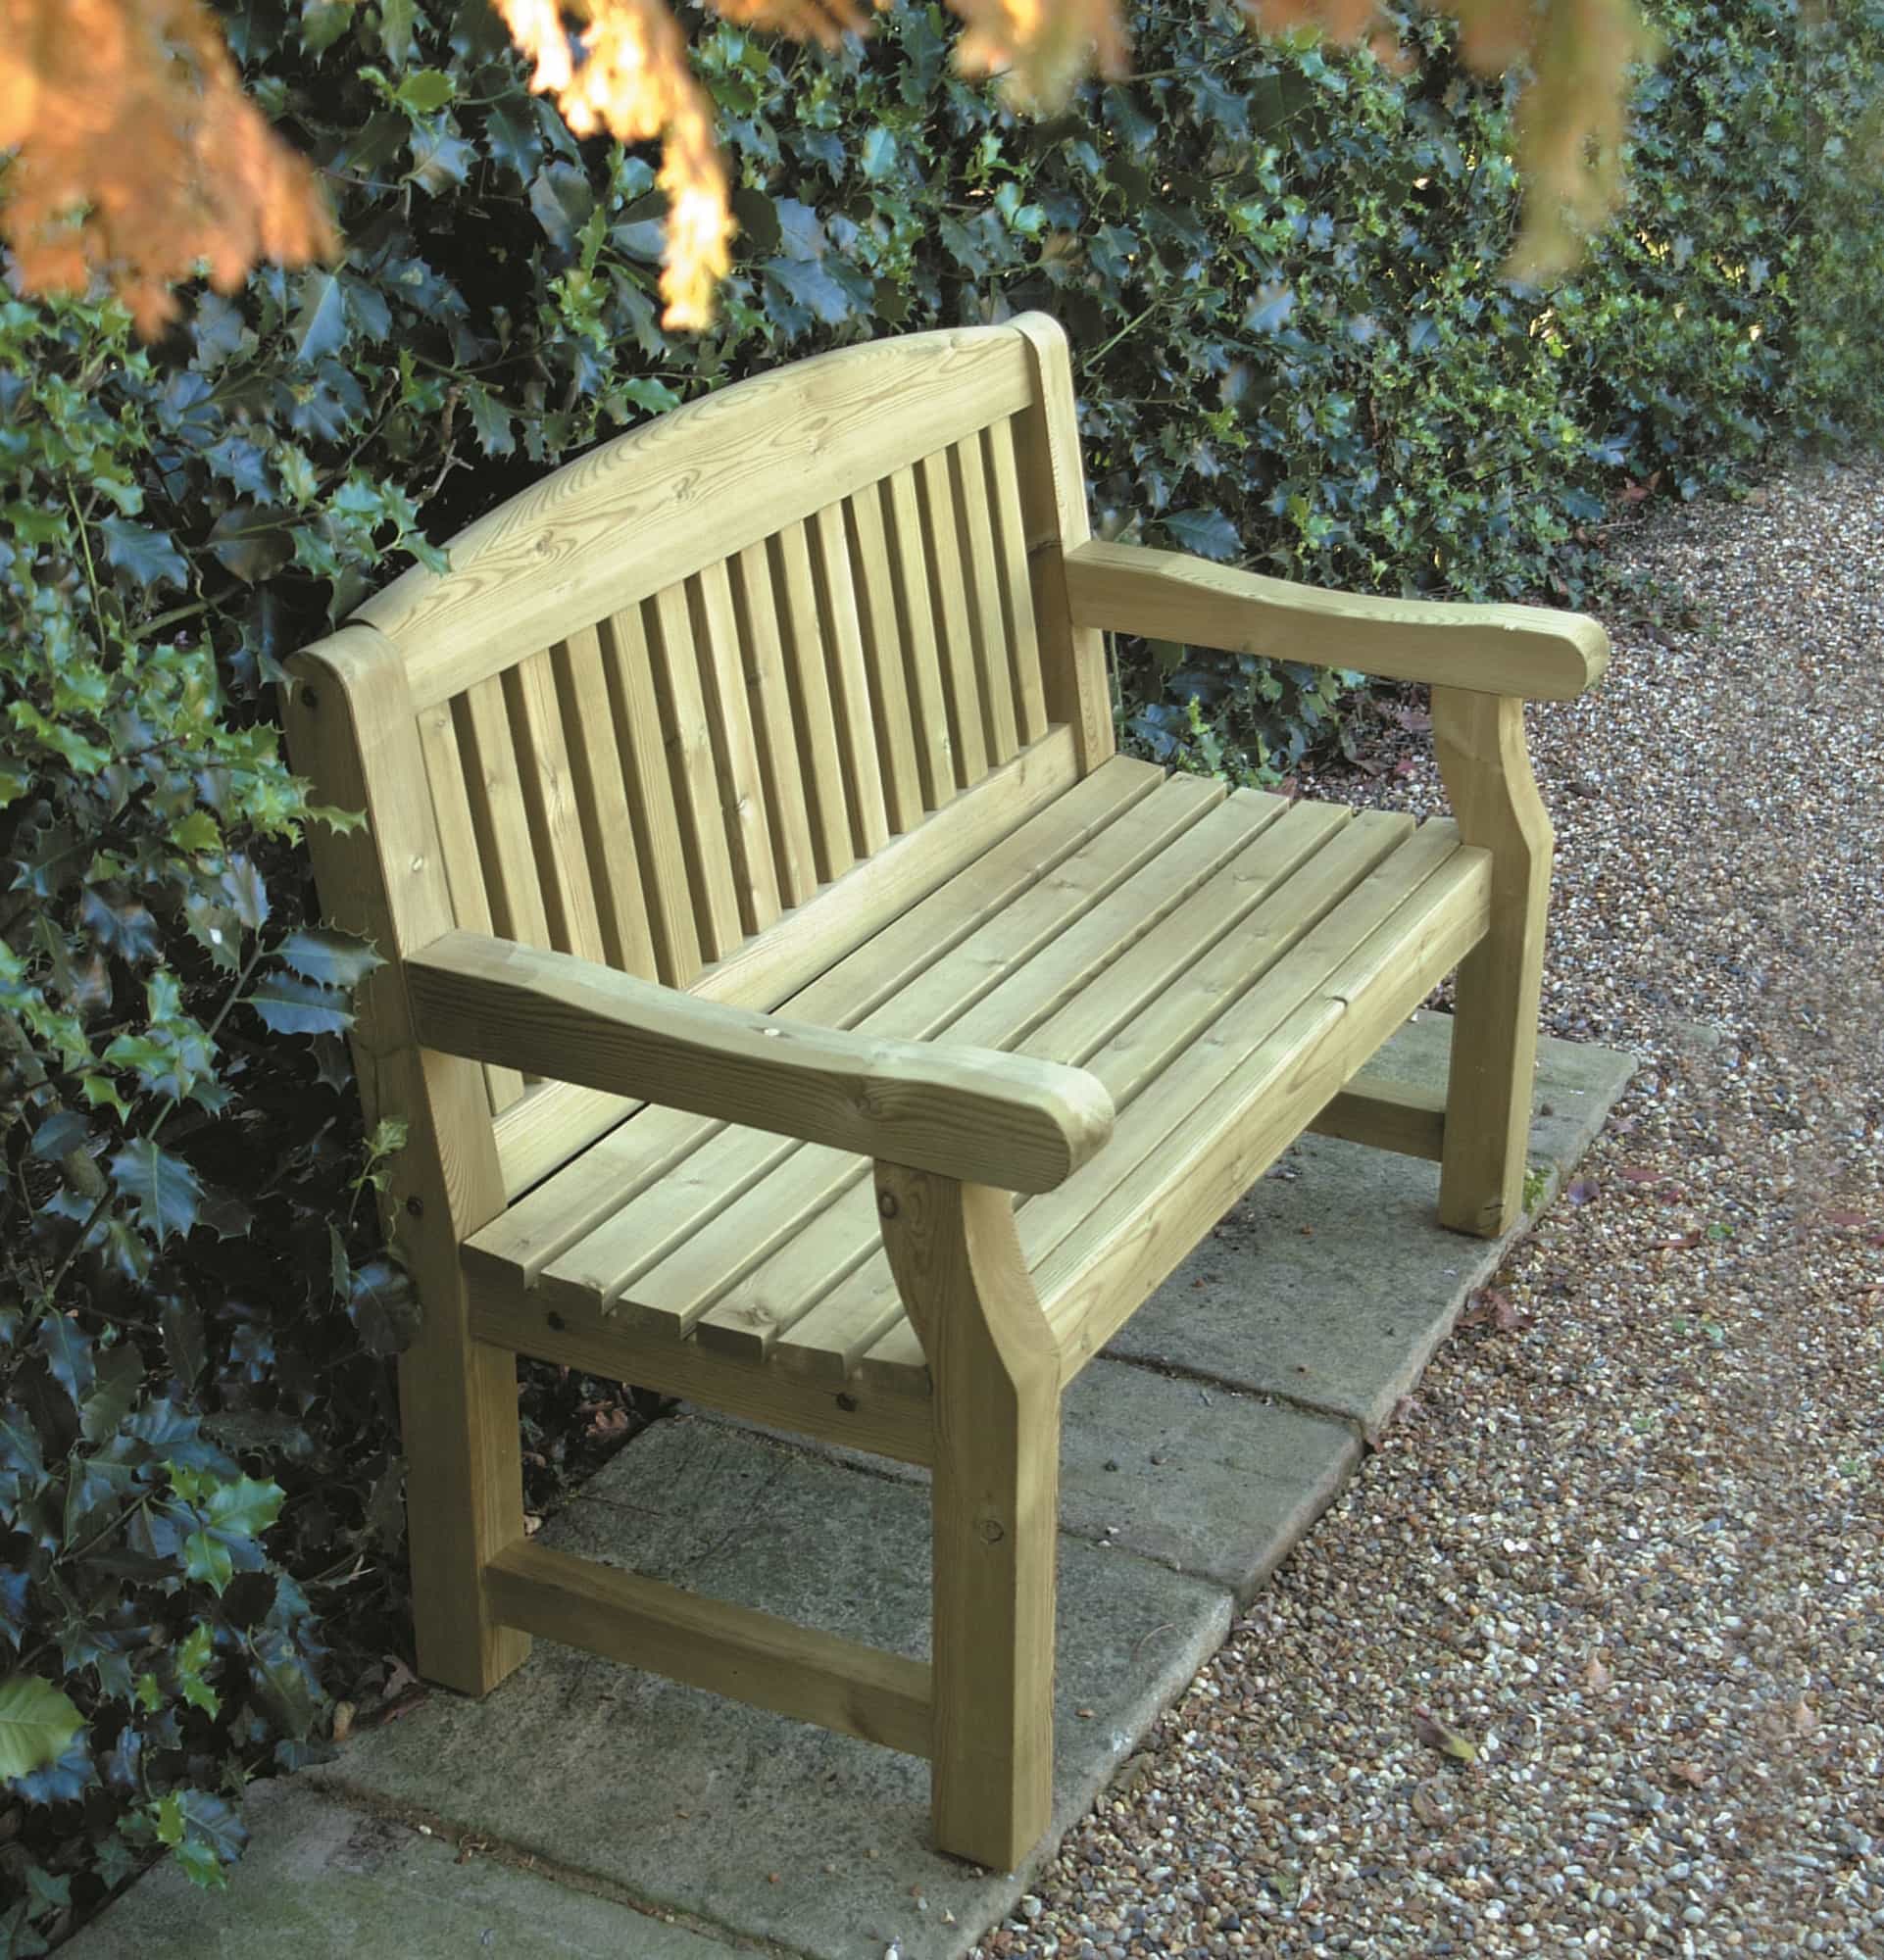 Wooden 5' Garden Bench s - Duncombe Sawmill, local and UK delivery from